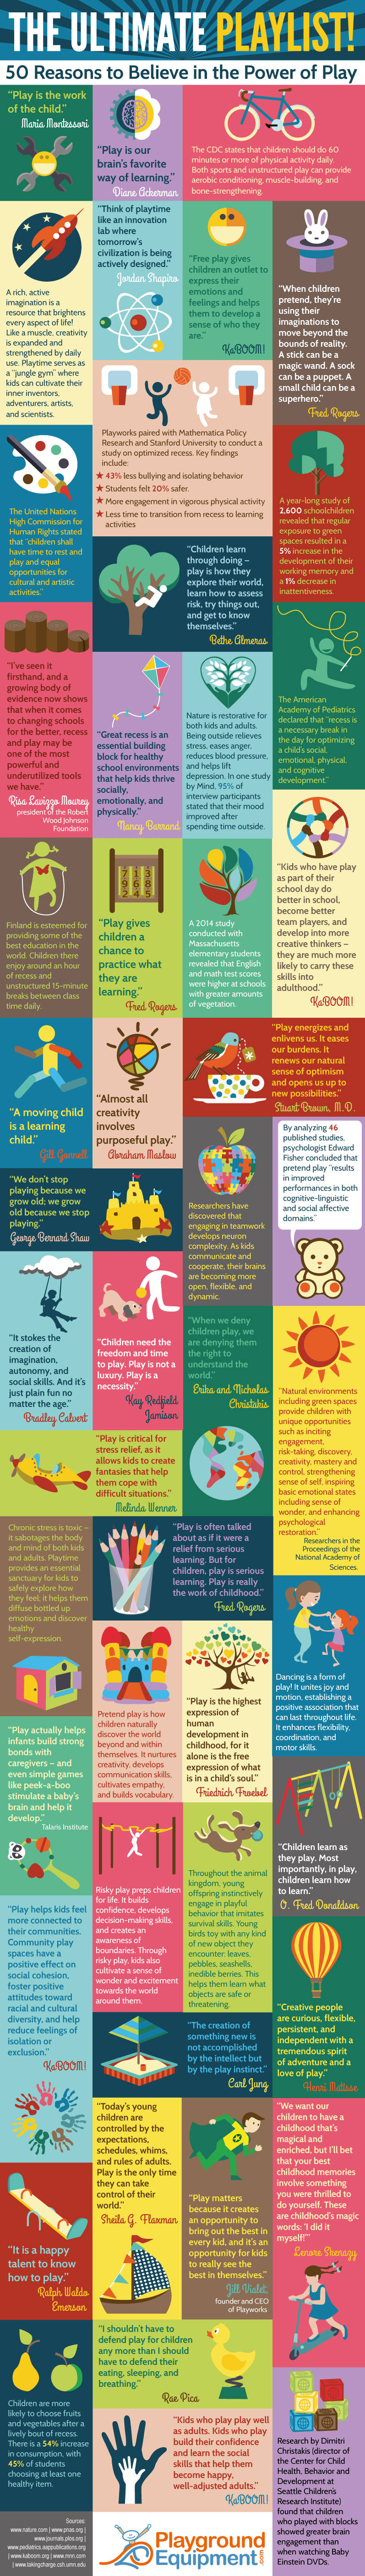 50 Reasons to Believe in the Power of Play Infographic